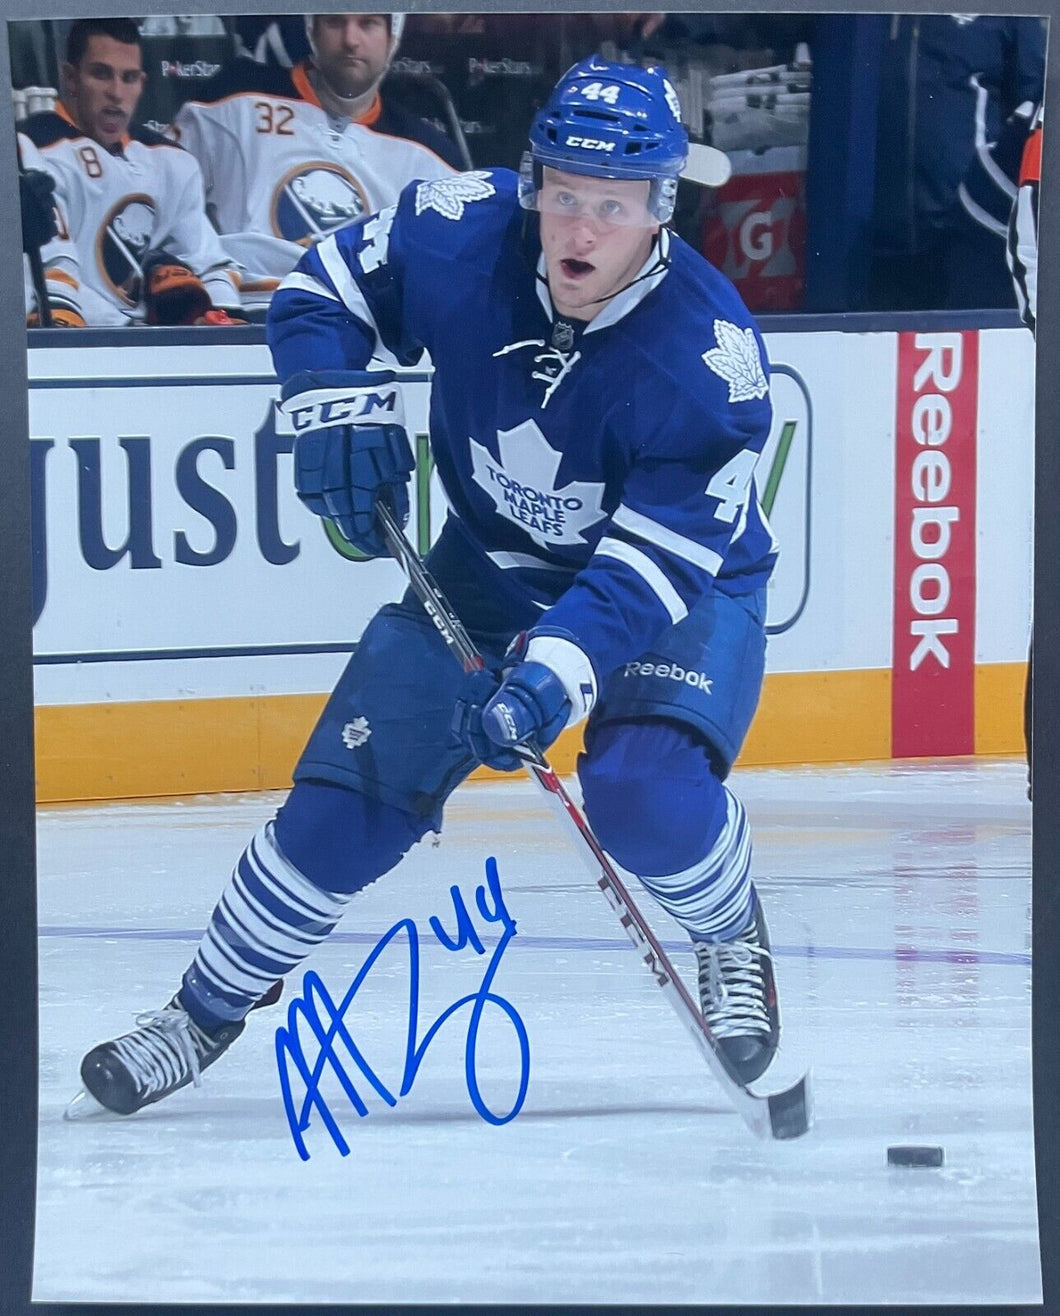 Morgan Rielly Signed NHL Hockey Photo Toronto Maple Leafs Autographed 8x10